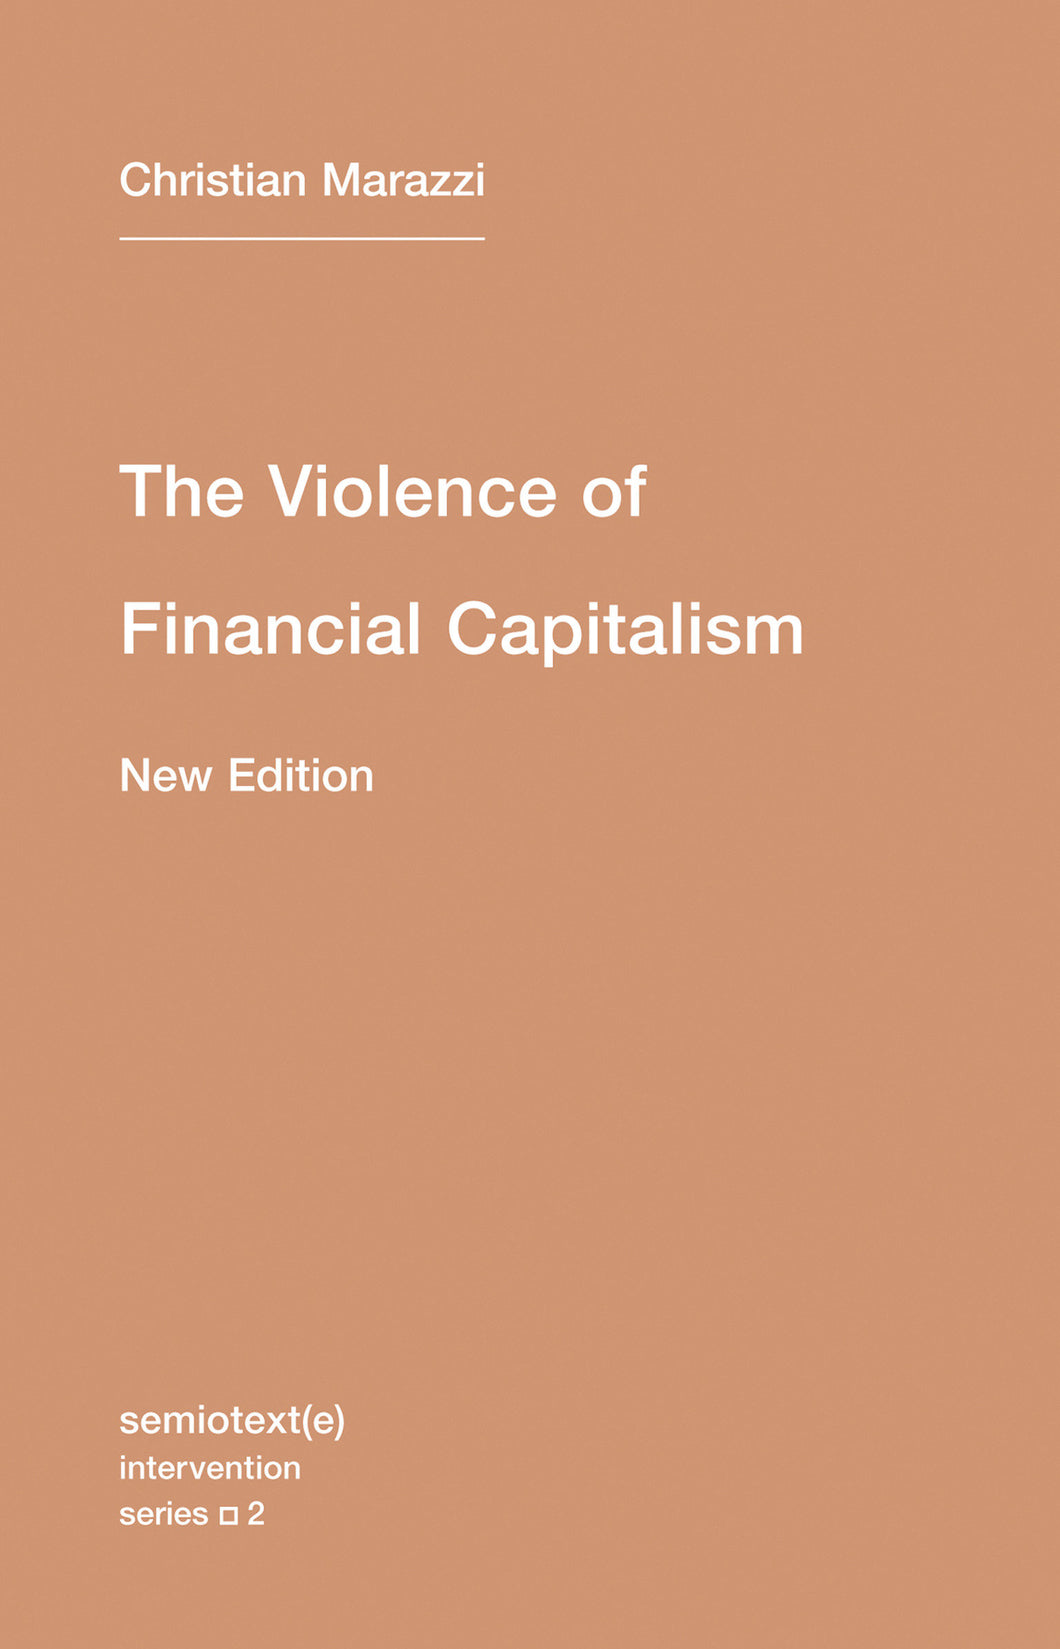 The Violence of Financial Capitalism, new edition